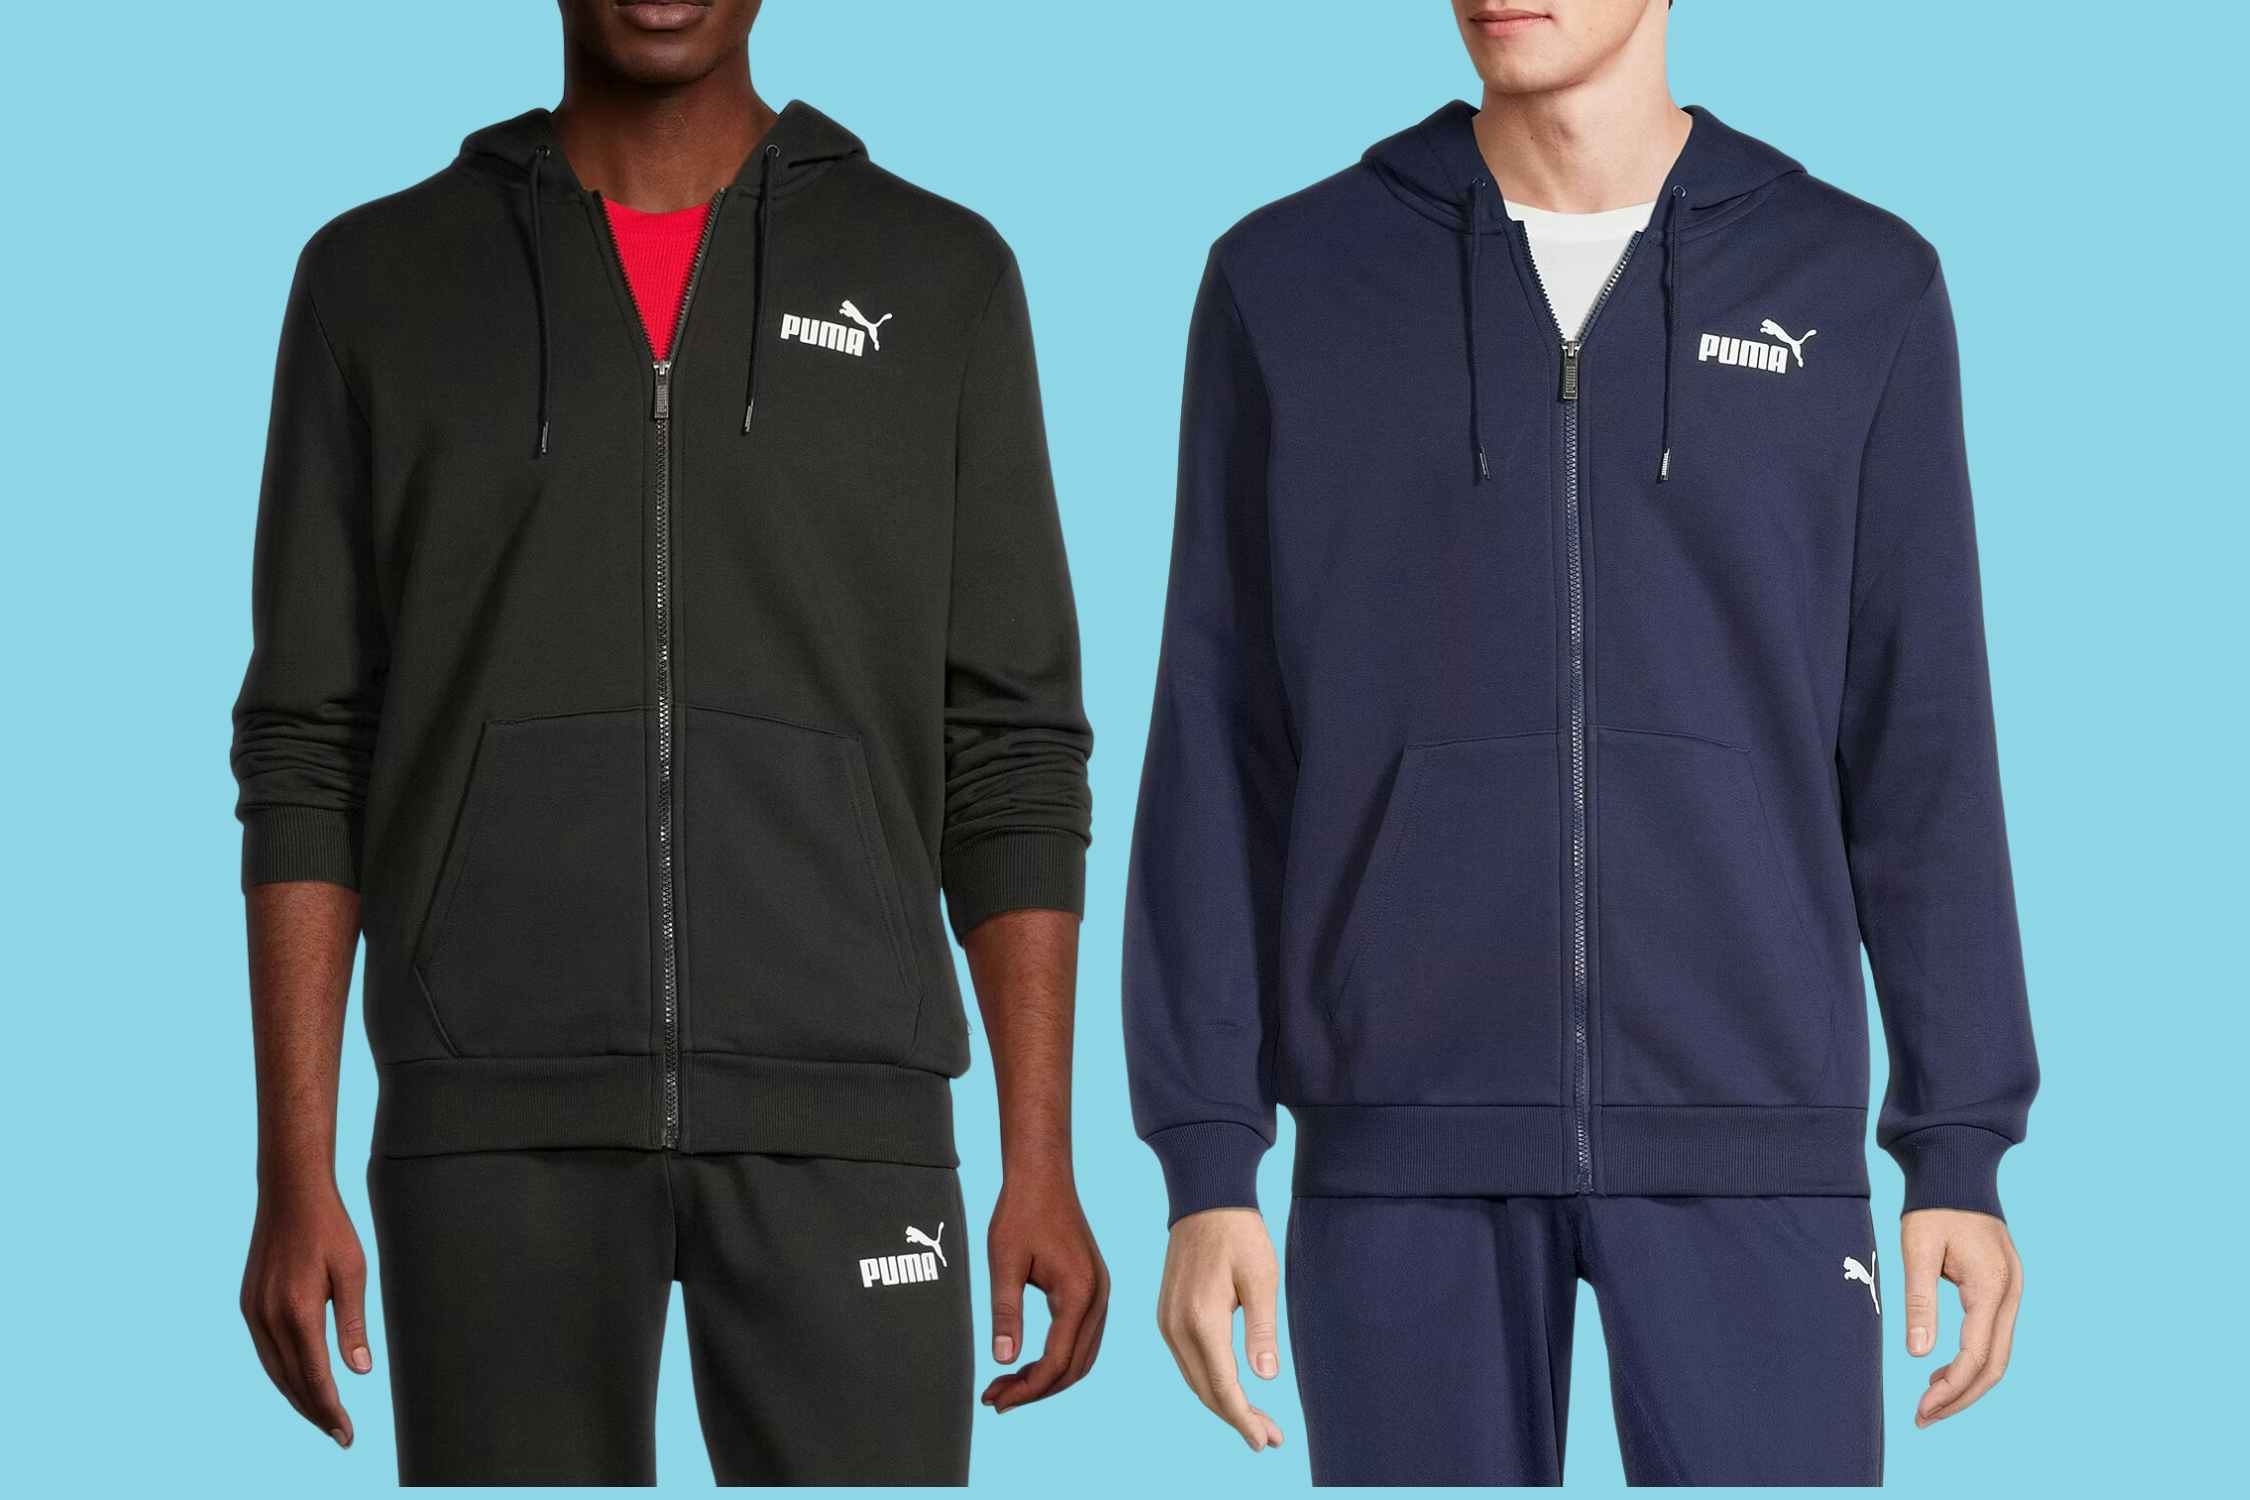 Puma Men's Zip-Up Hoodie, Now $20 at JCPenney — Cheaper Than Amazon